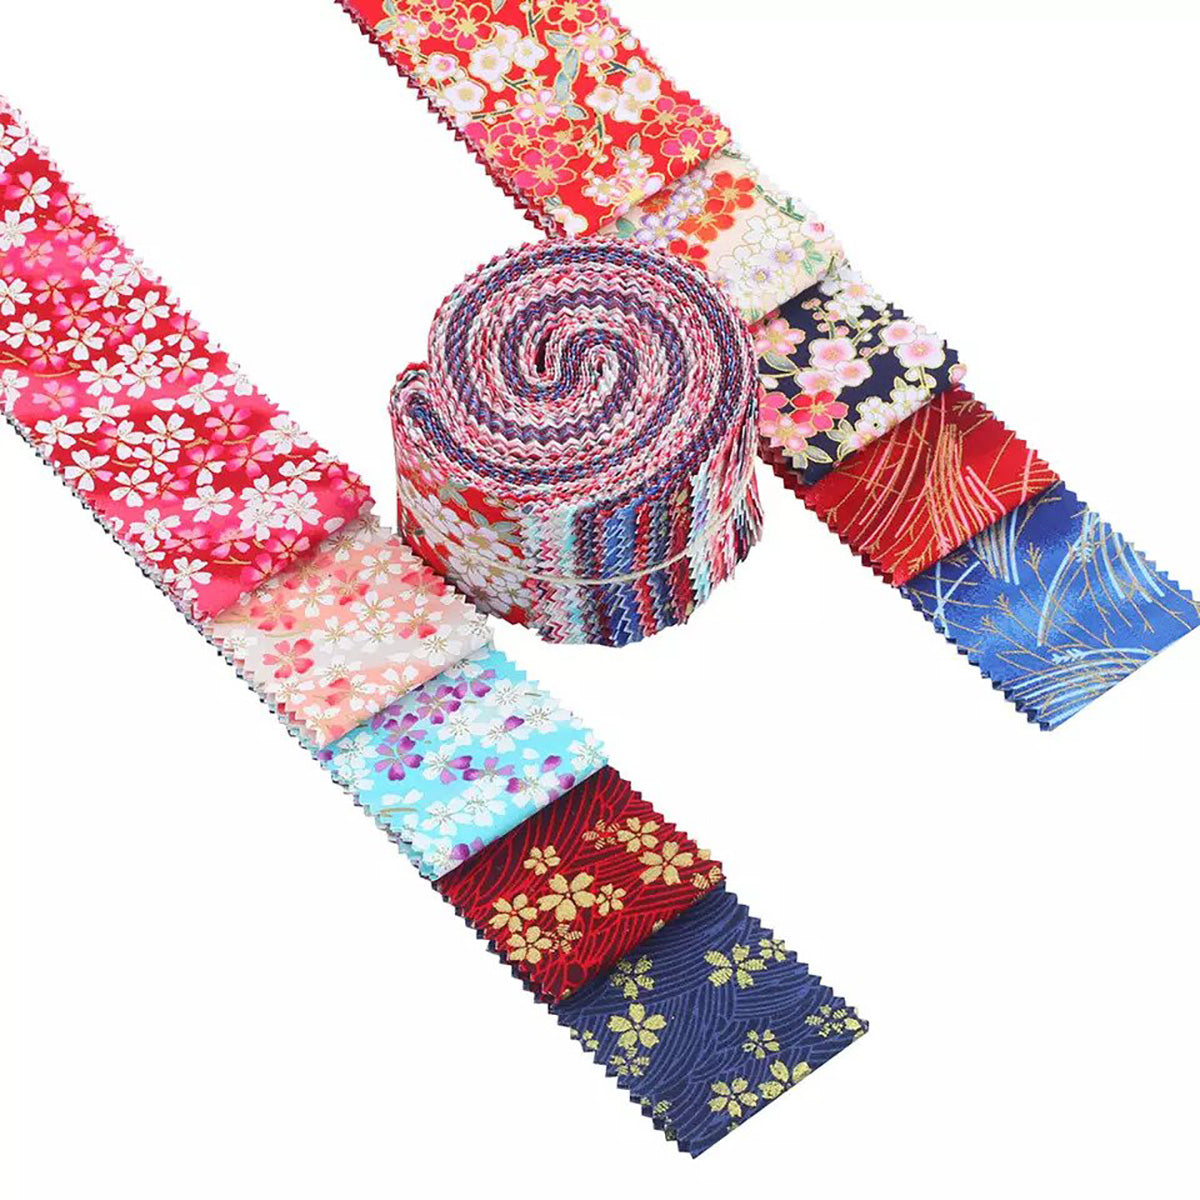 CraftsFabrics 20pcs Floral Jelly Rolls Strips Fabric for Quilting